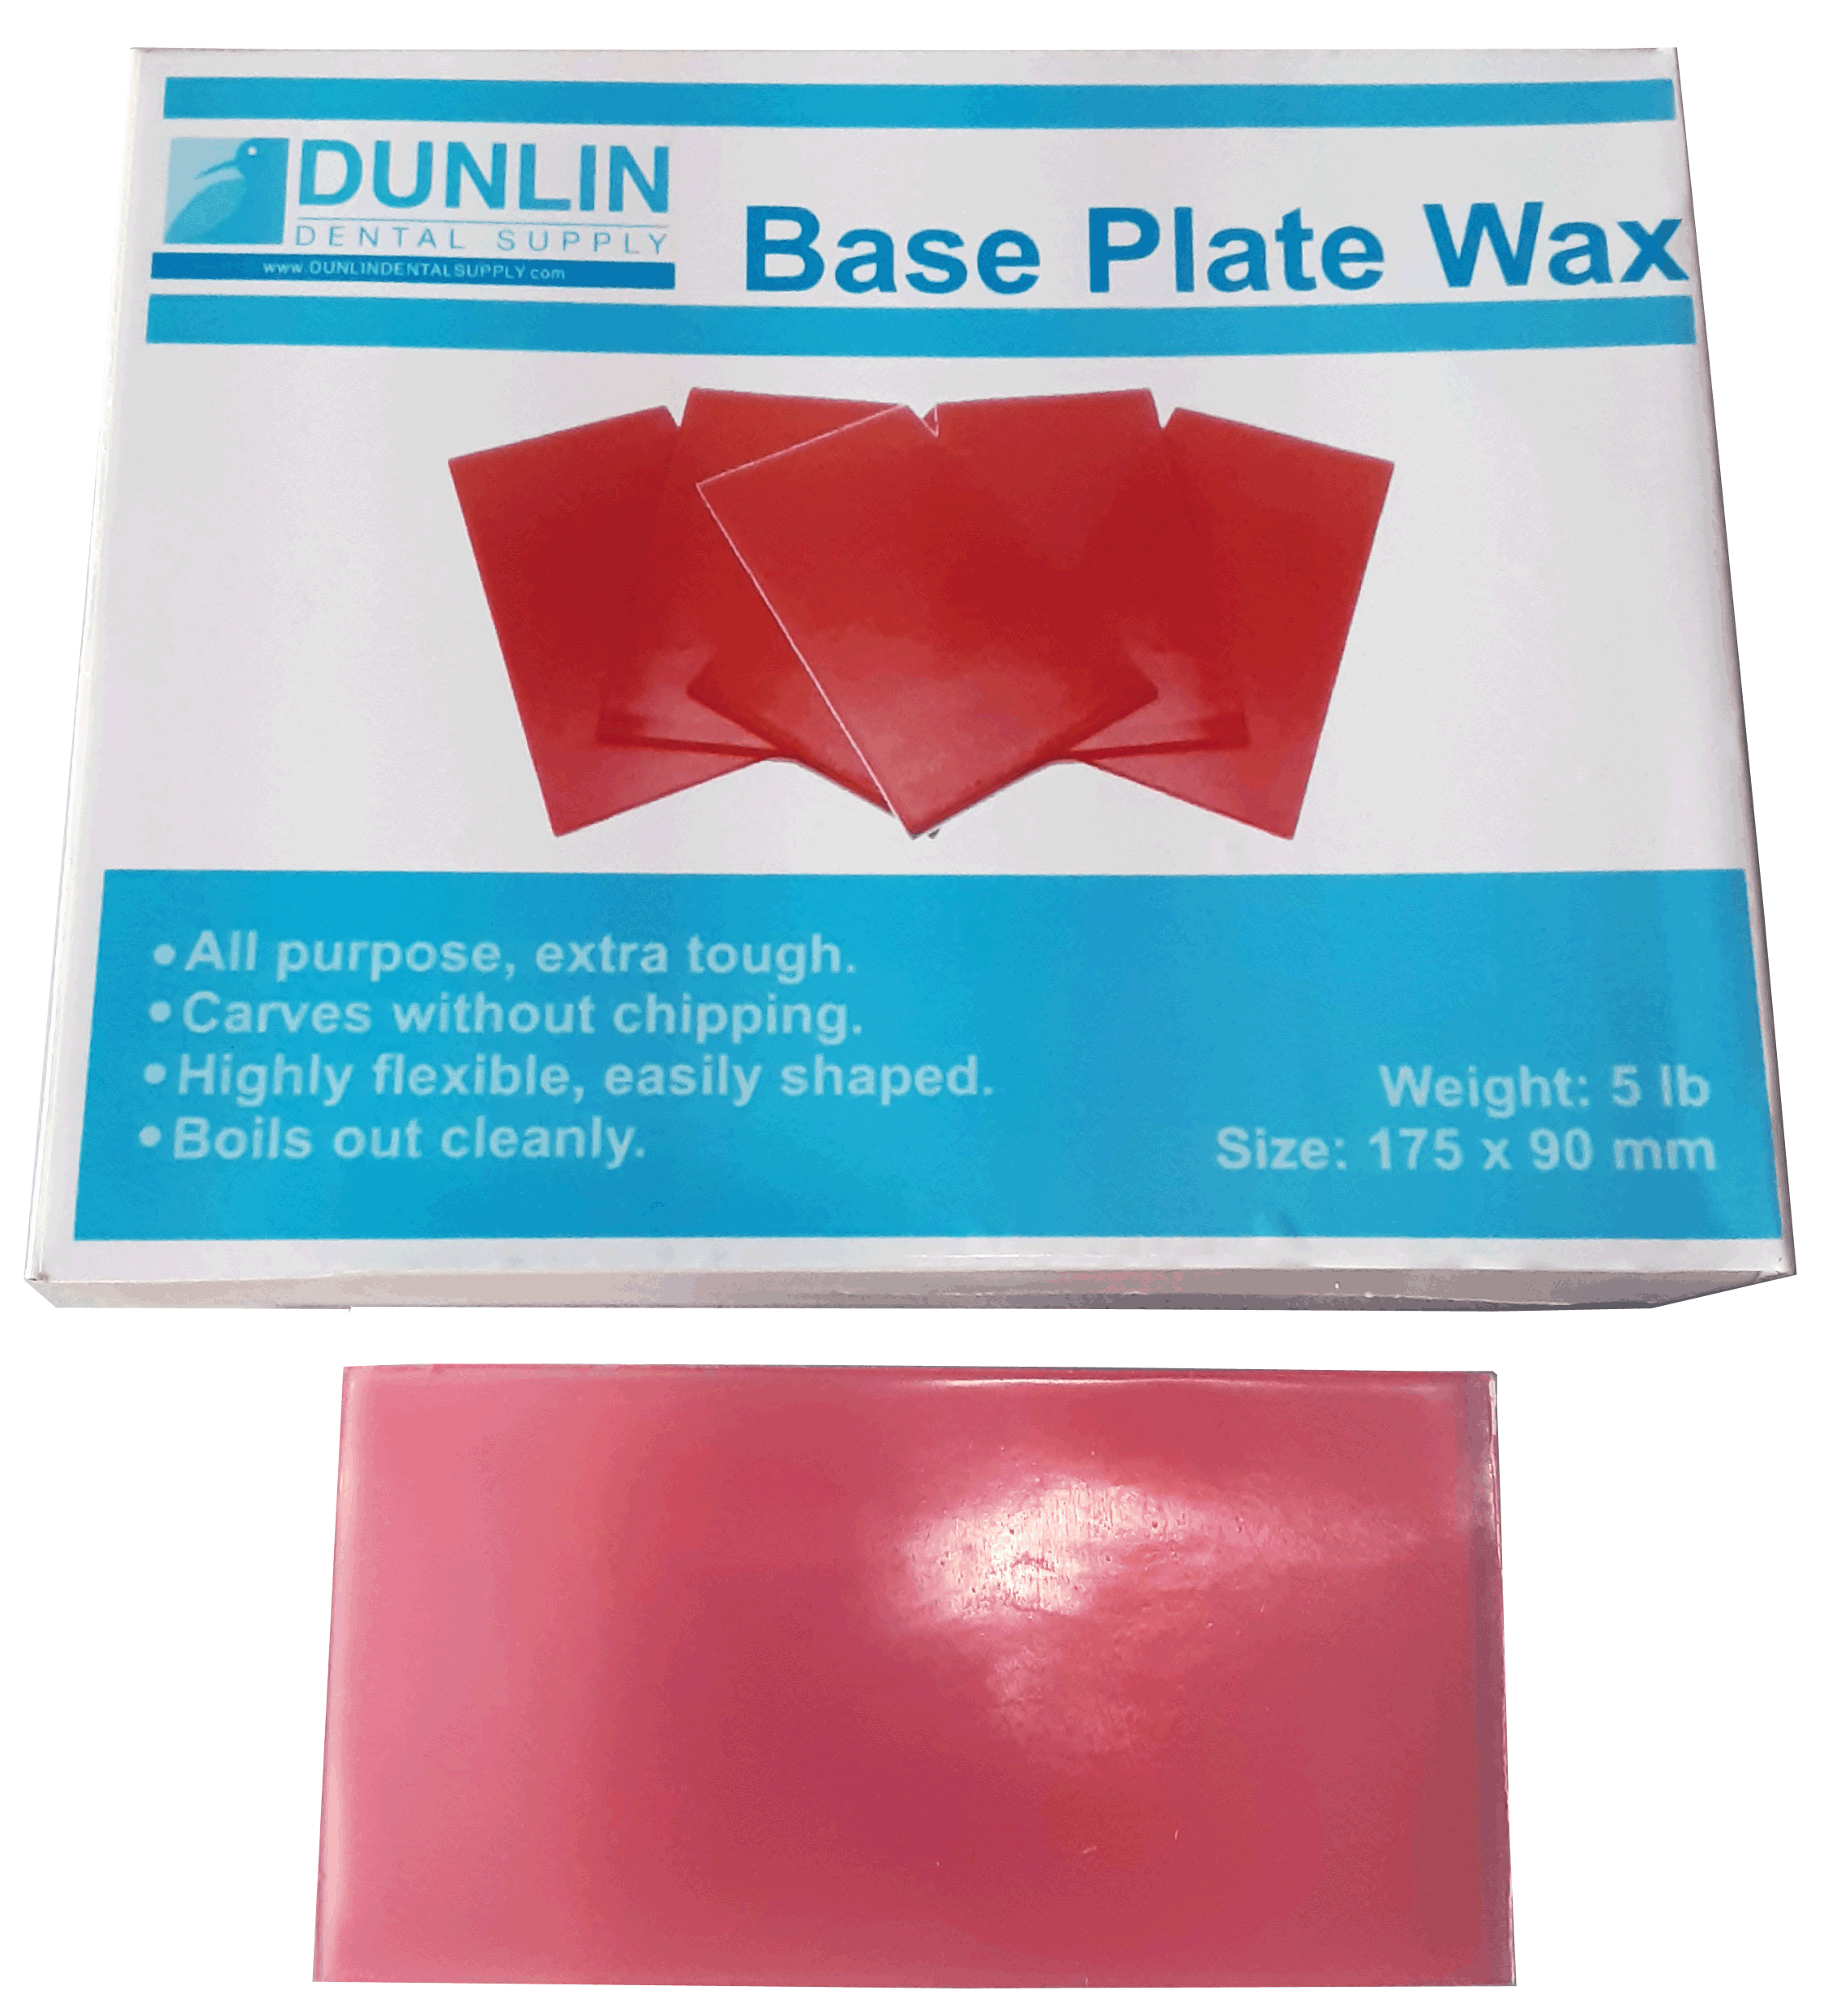 Dunlin Dental Baseplate Wax Sheets 5LB Pink Color, Size: 6.36 x 3.54 x 0.06